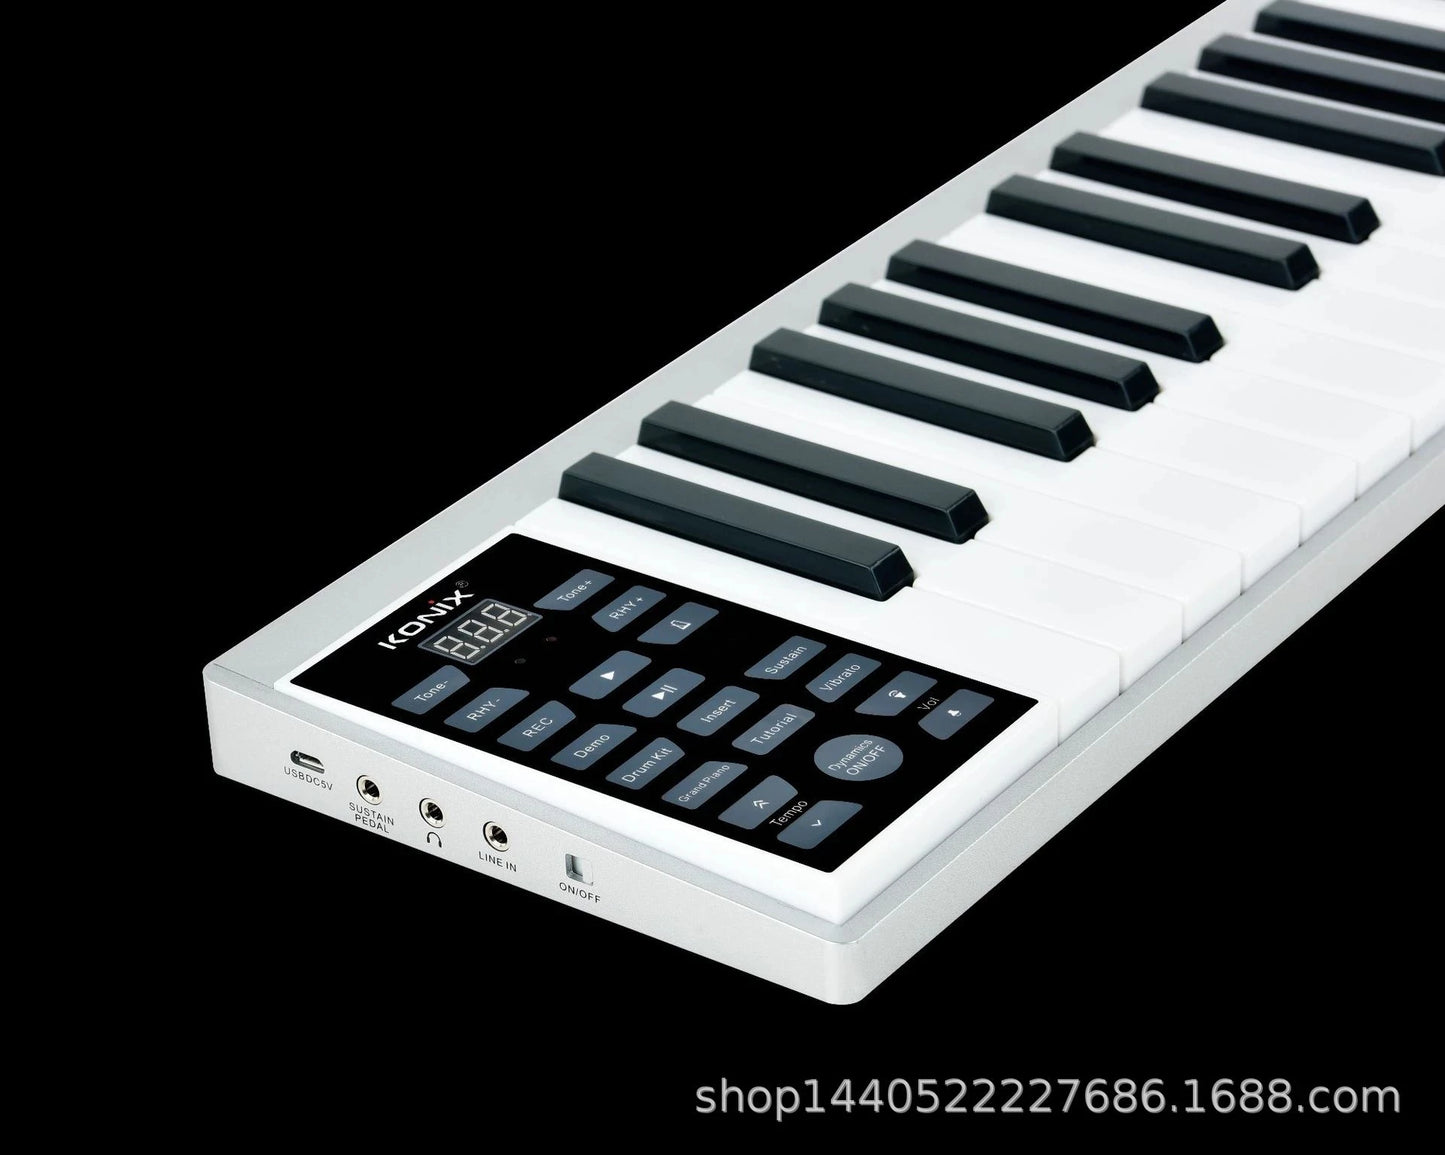 2023 New Piano Musical Keyboard 61-key Electronic Music Synthesize Controller Portable Adult Professional midi controller piano